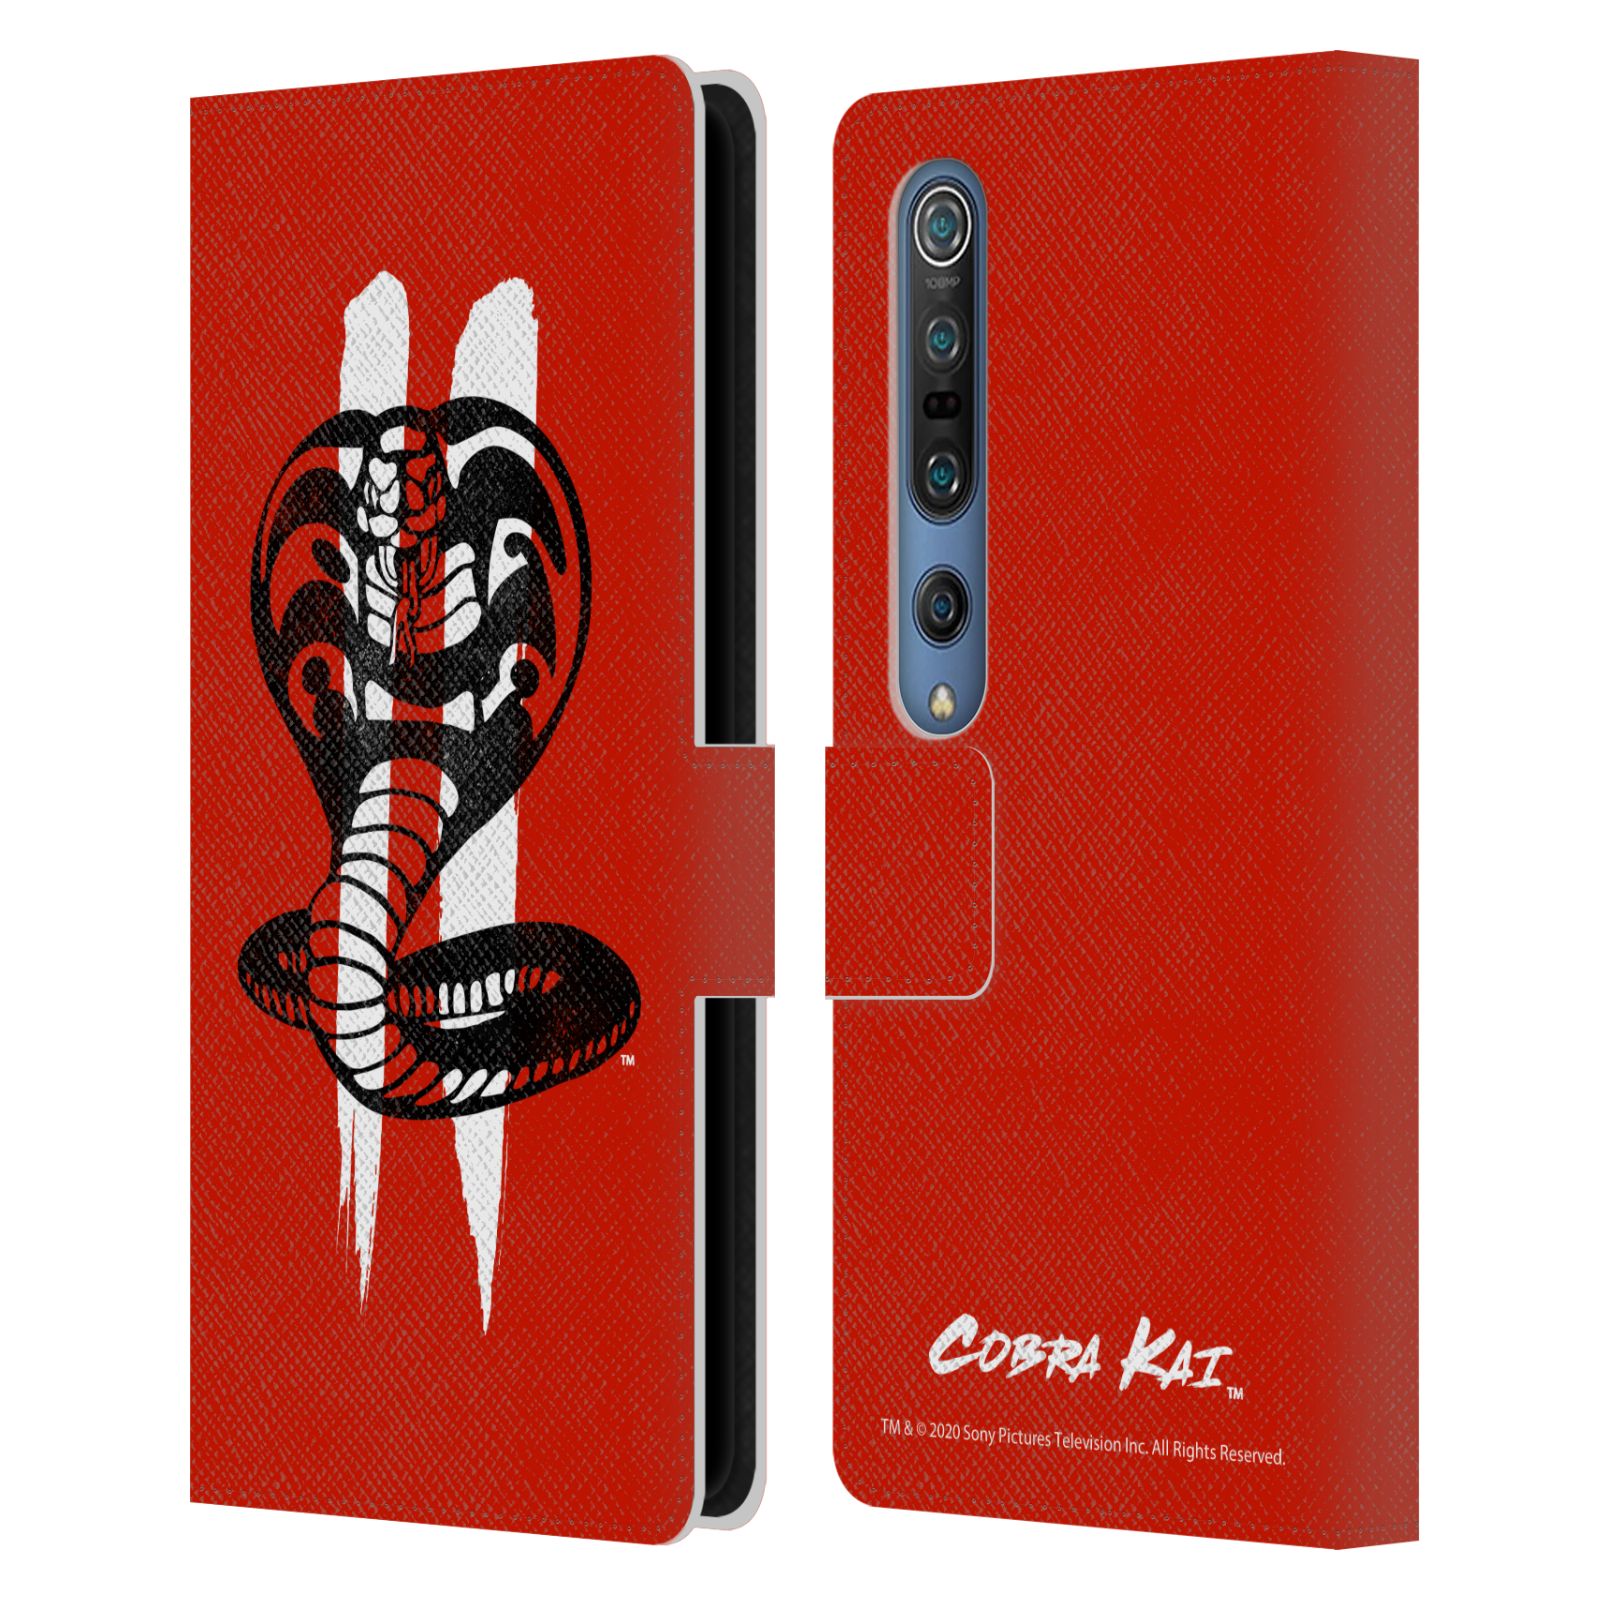 OFFICIAL COBRA KAI GRAPHICS LEATHER BOOK WALLET CASE COVER FOR XIAOMI PHONES